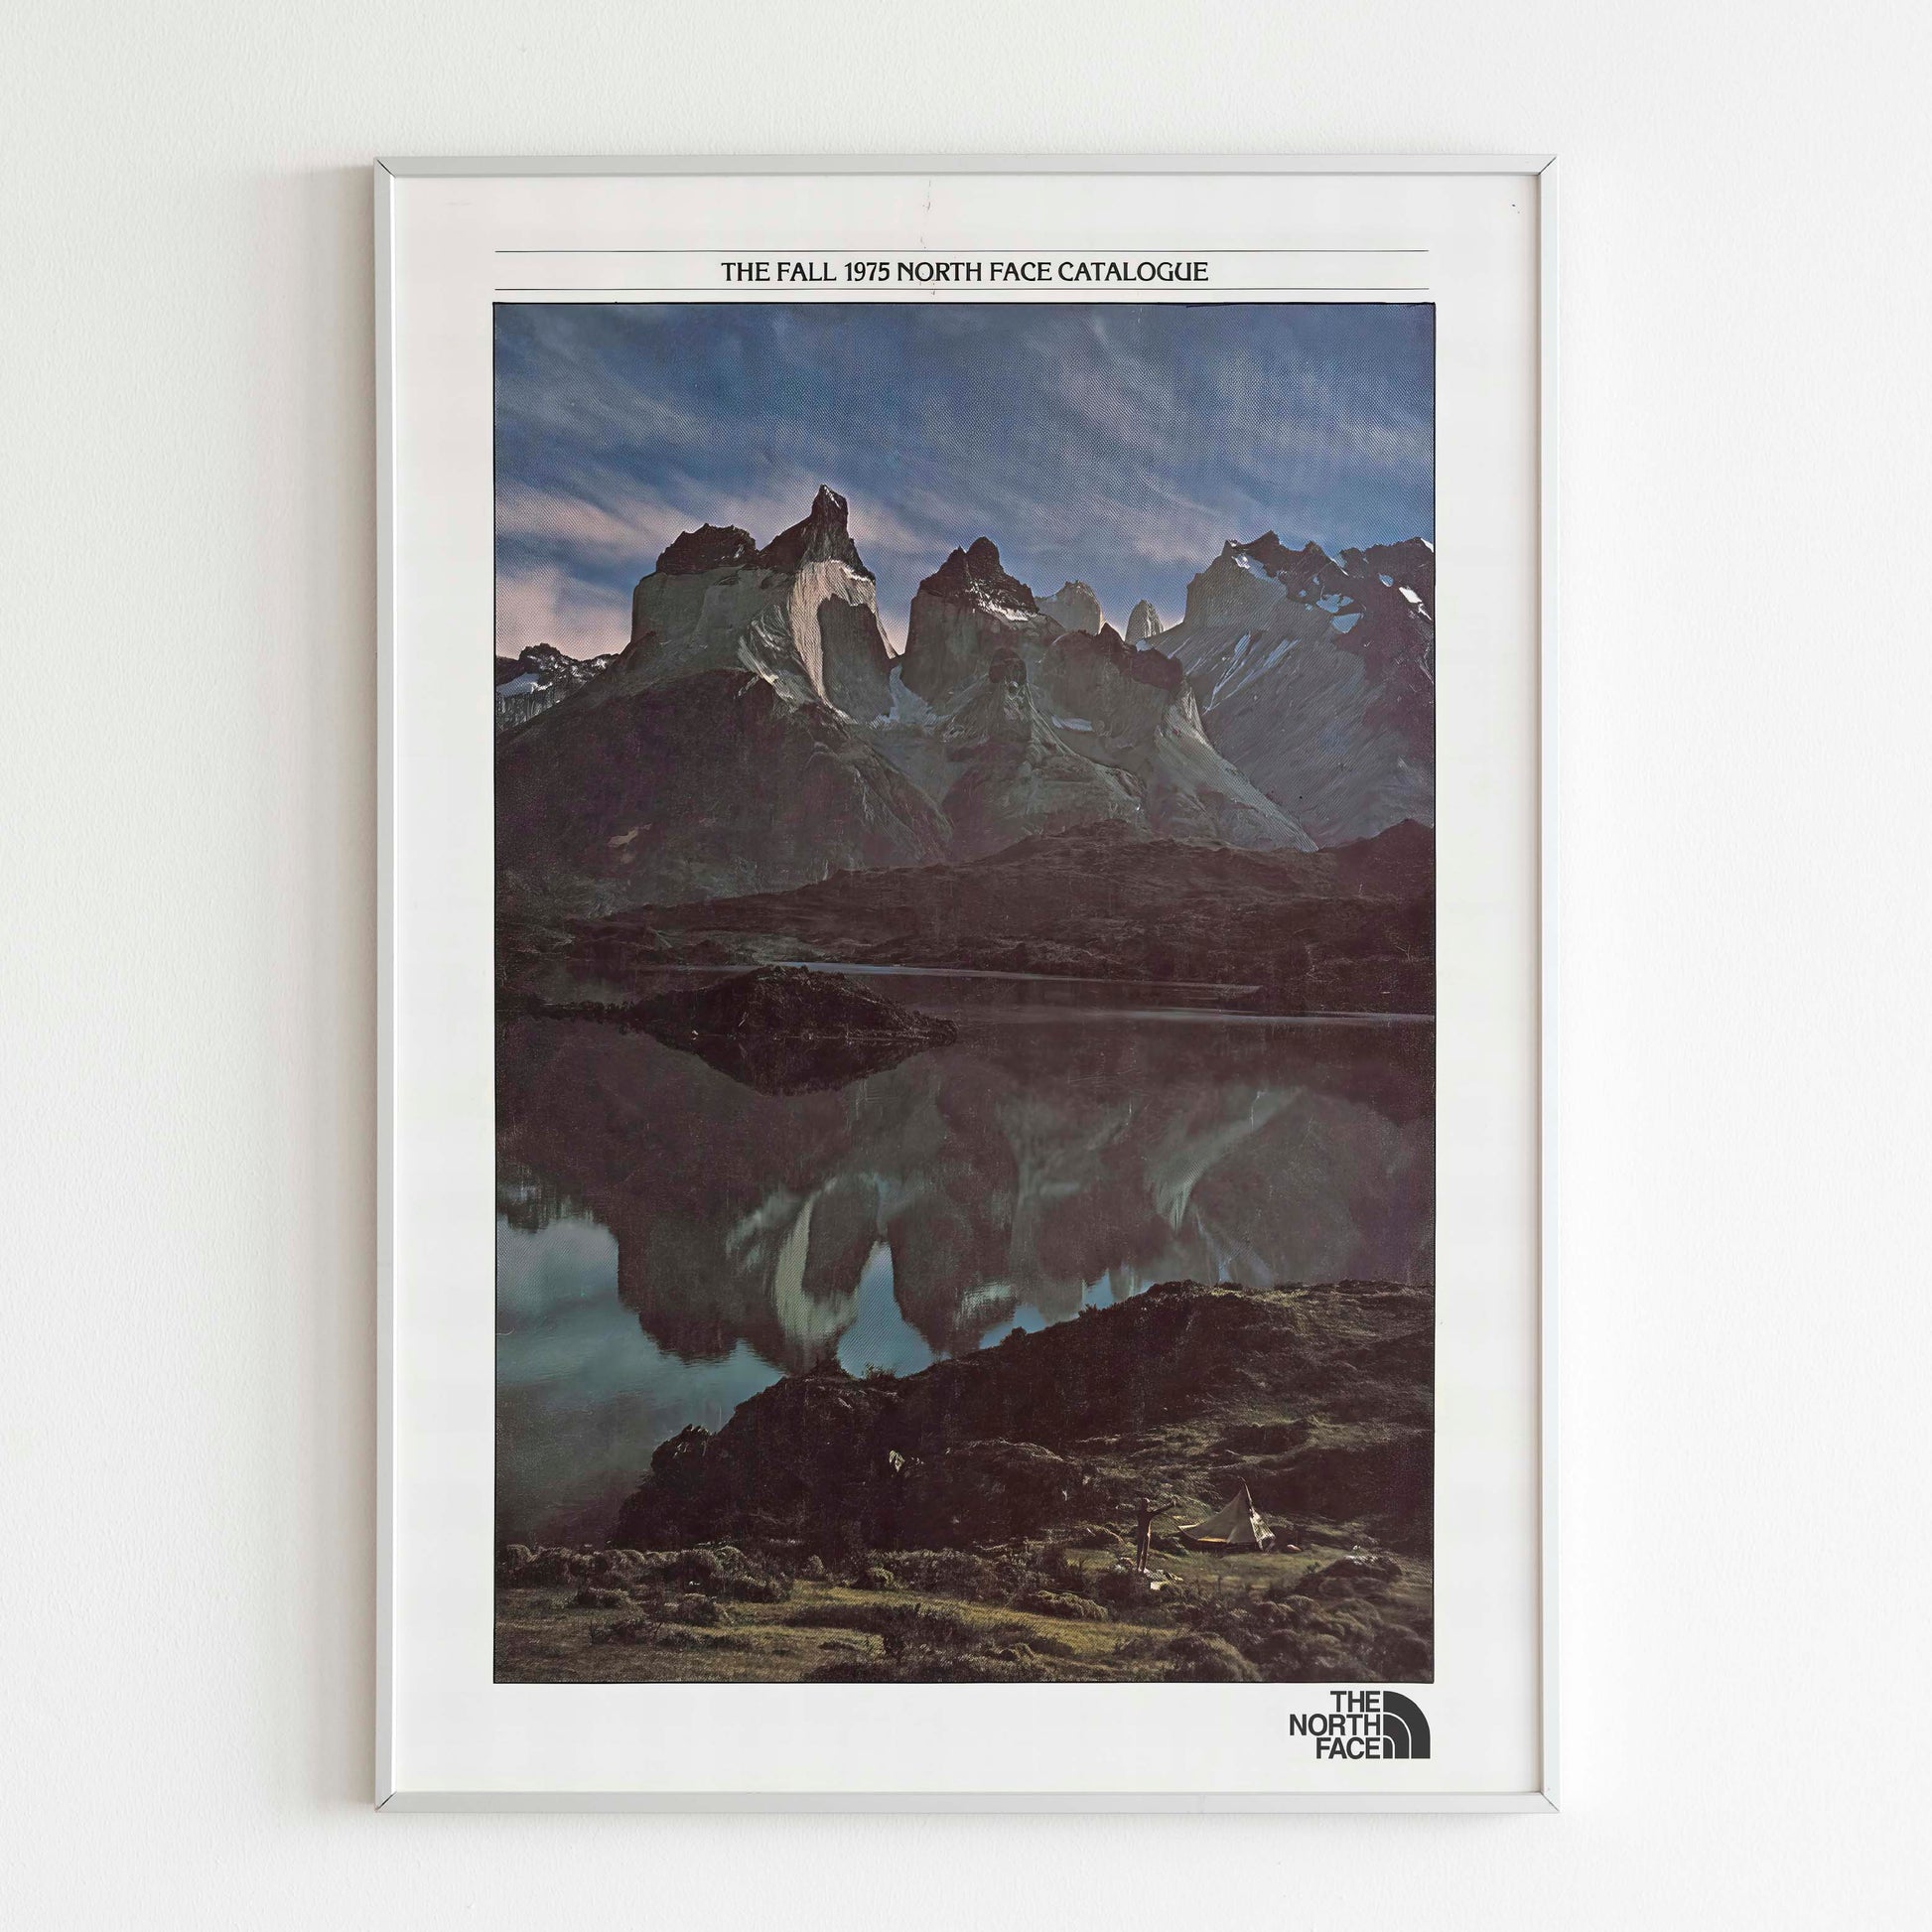 The North Face 1975 The Fall Catalogue Advertising Poster, 70s Style Outdoor Print, Vintage Ad Wall Art, Magazine Retro Advertisement